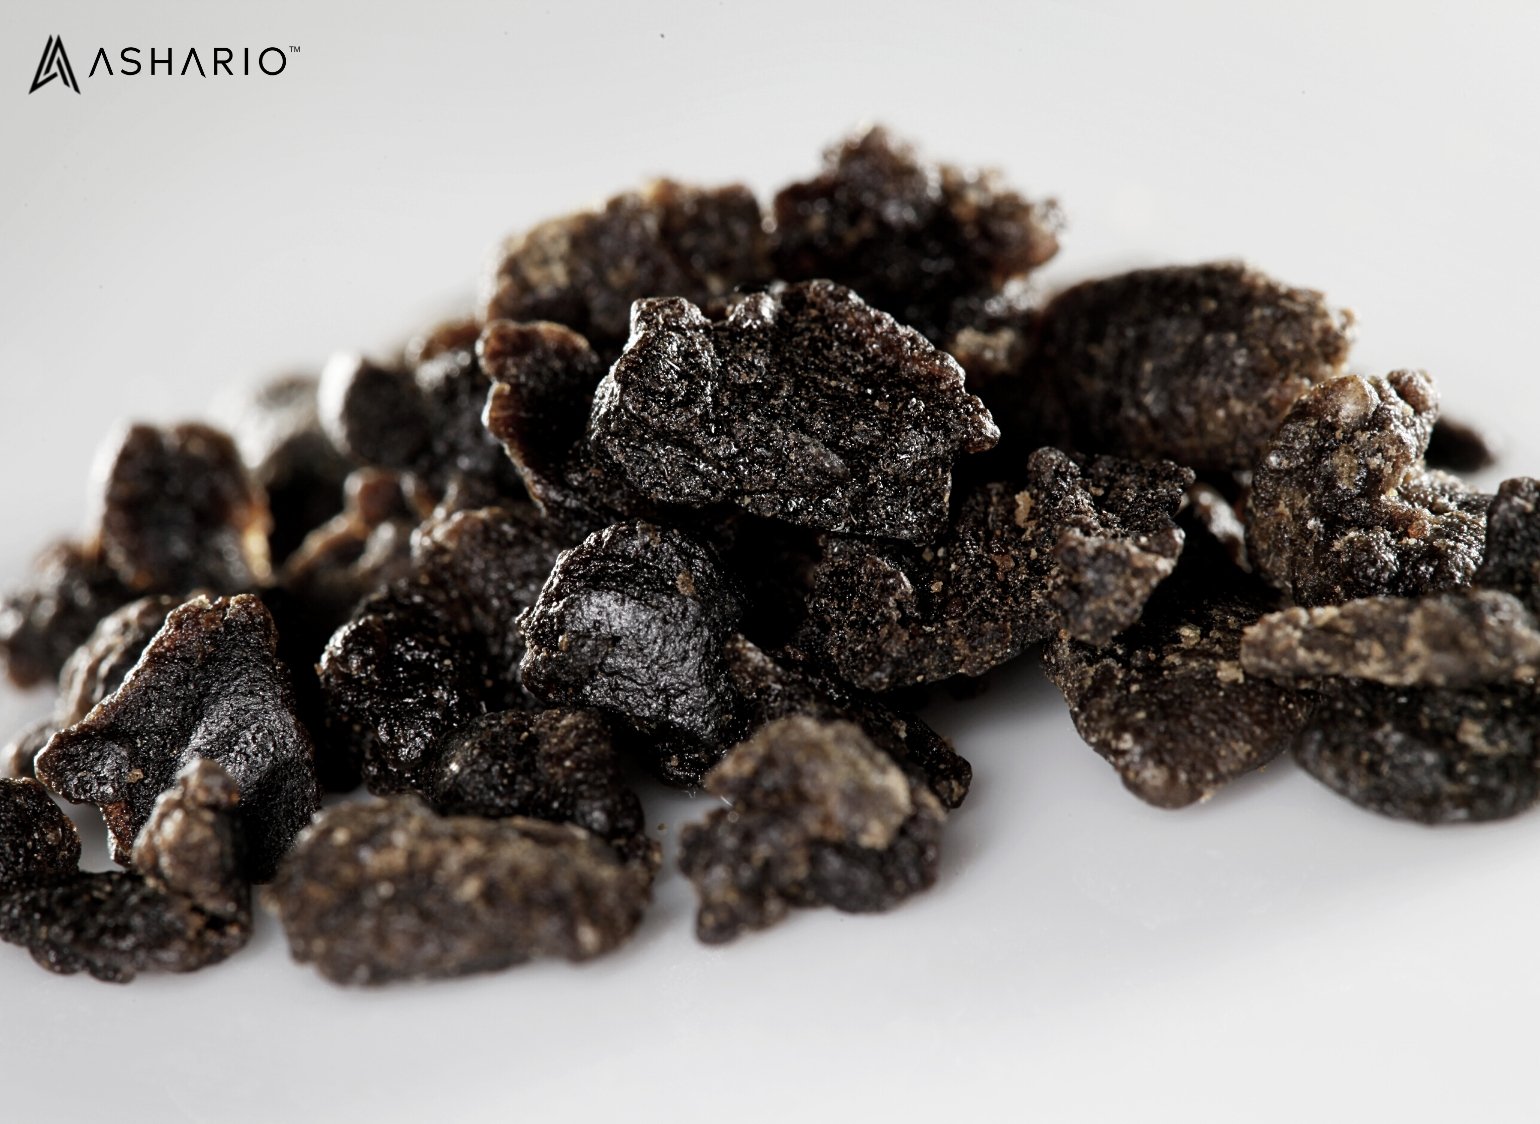 Hash, short for hashish, is a cannabis concentrate produced by extracting resin from the plant's trichomes. It has been used for centuries and is known for its potent effects. 